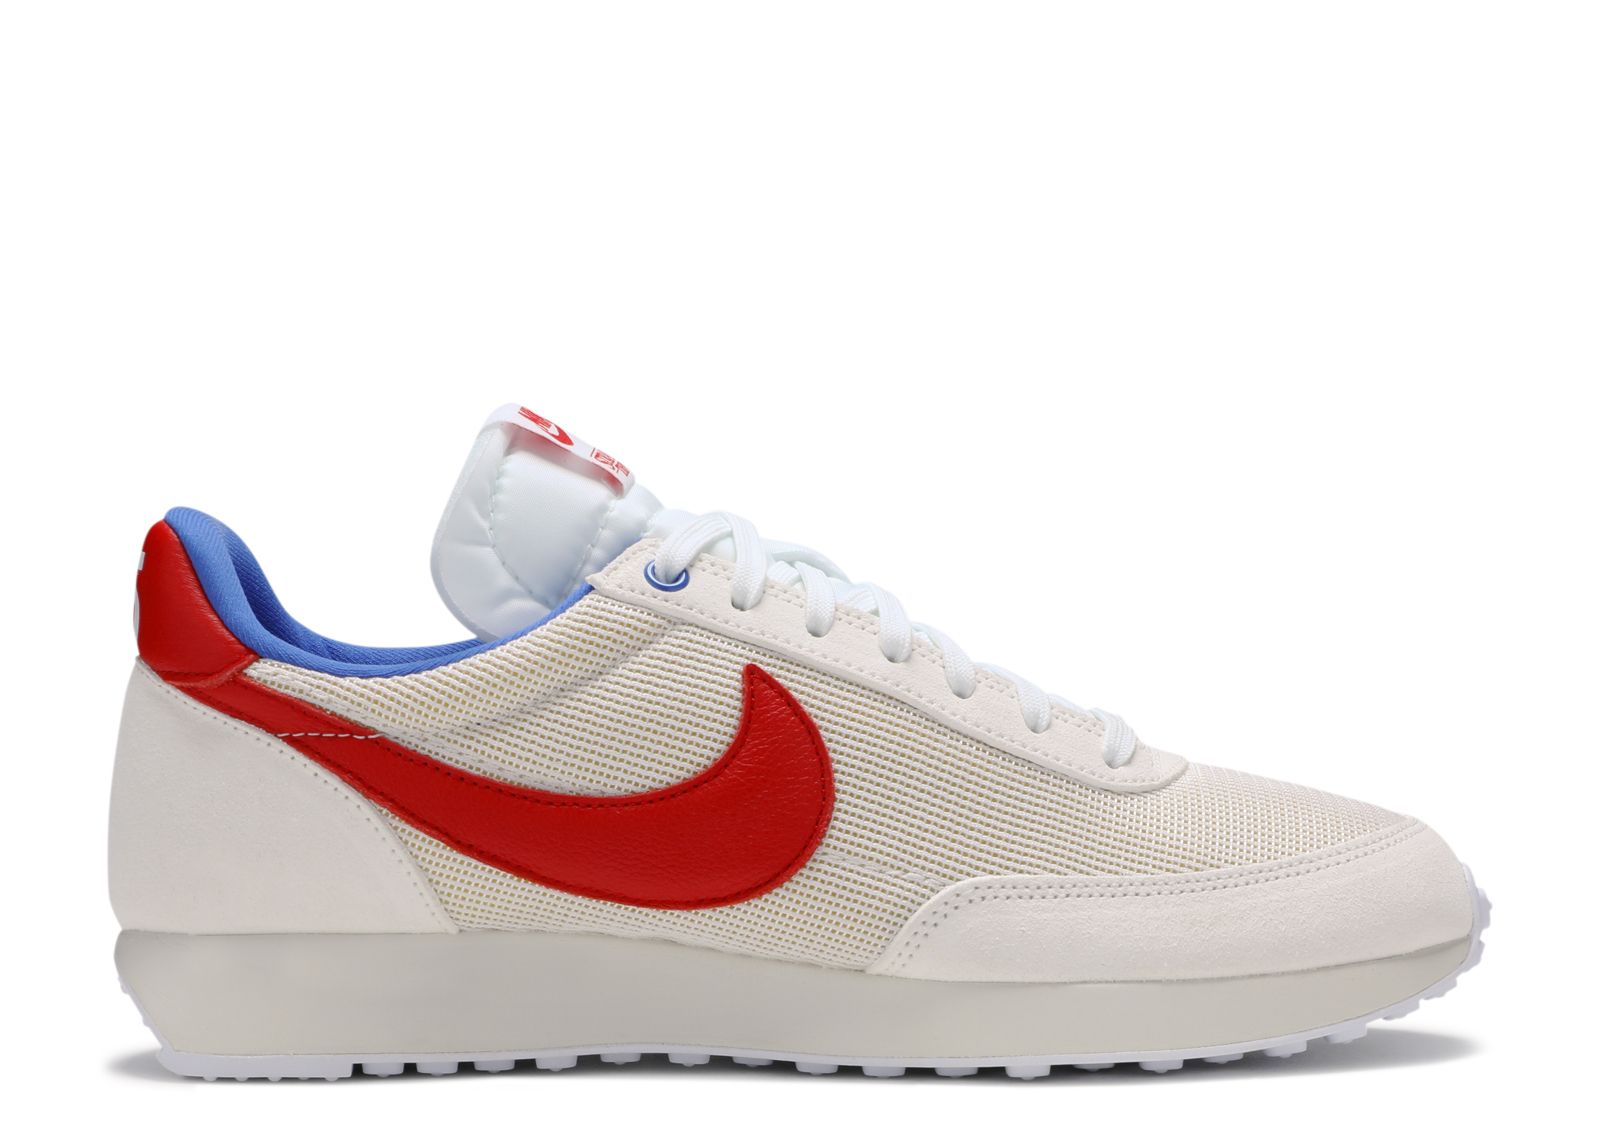 Zuidwest Stroomopwaarts Met andere bands Stranger Things X Air Tailwind 79 'OG Collection' - Nike - CK1905 100 -  white/university red | Flight Club